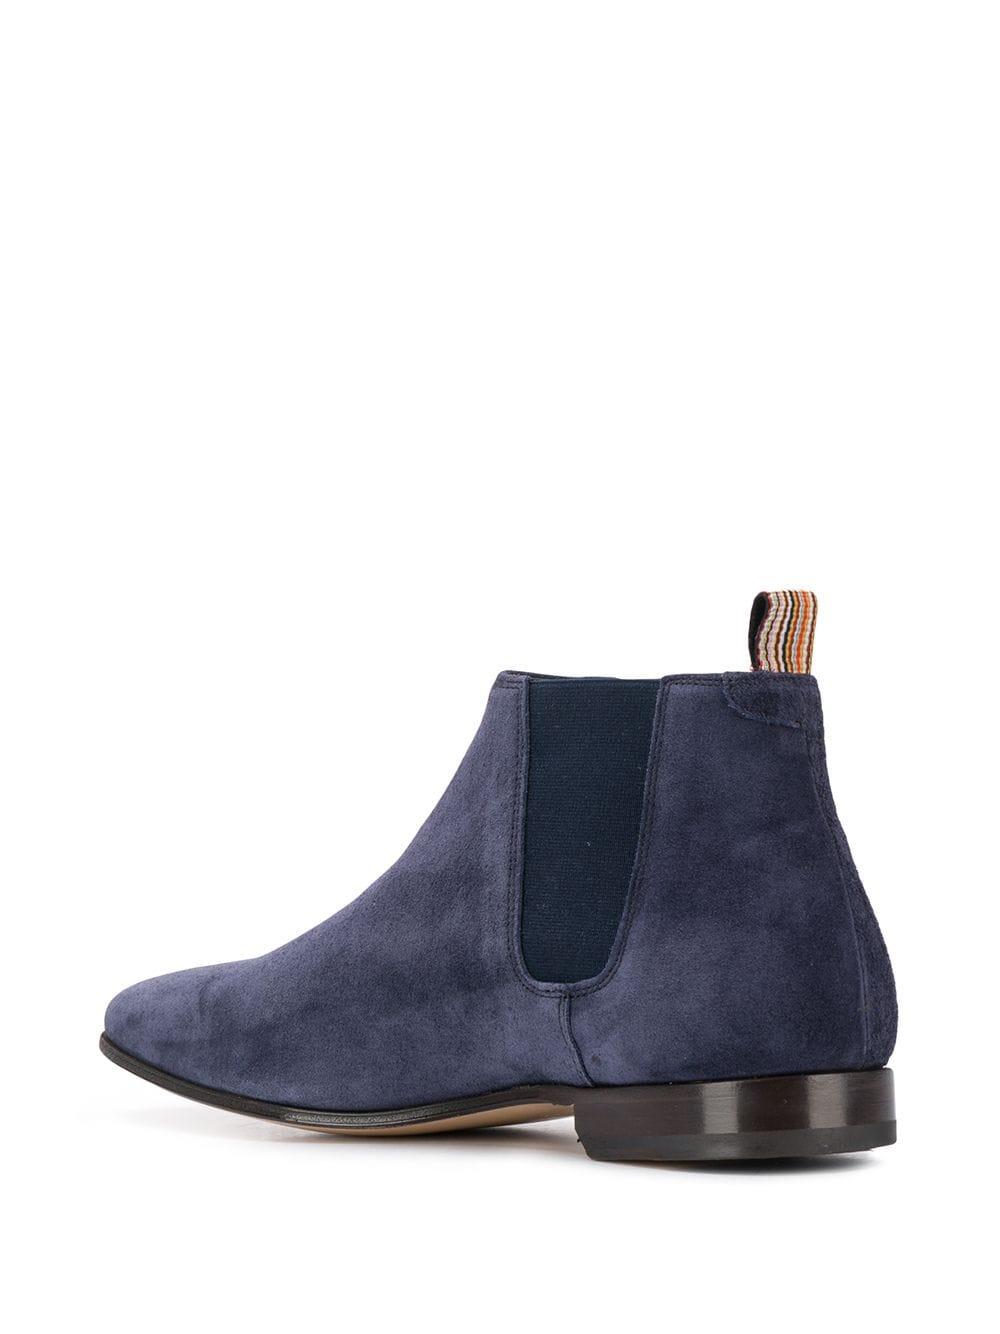 Bottines Chelsea Paul Smith France, SAVE 47% - sistersfromanothermother.ch